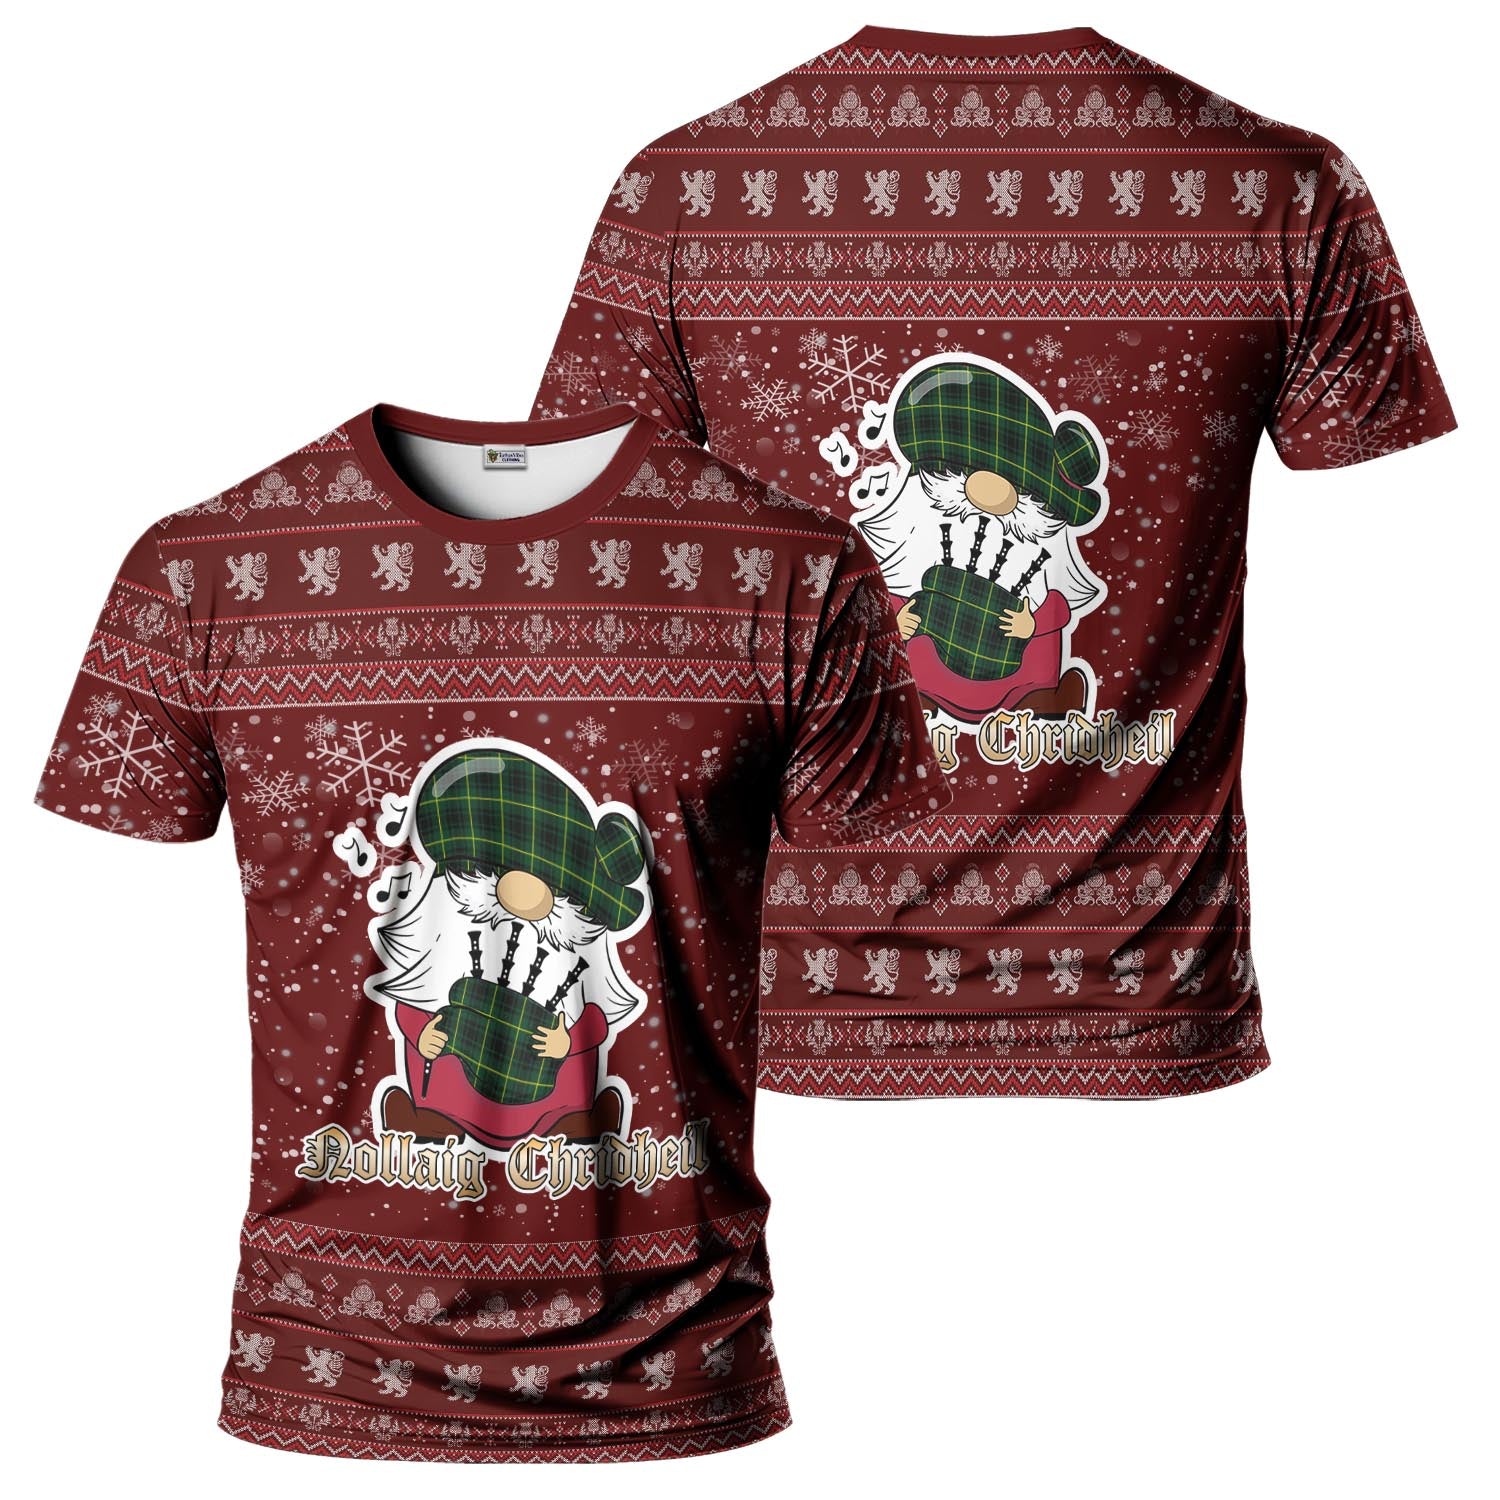 MacArthur Modern Clan Christmas Family T-Shirt with Funny Gnome Playing Bagpipes - Tartanvibesclothing